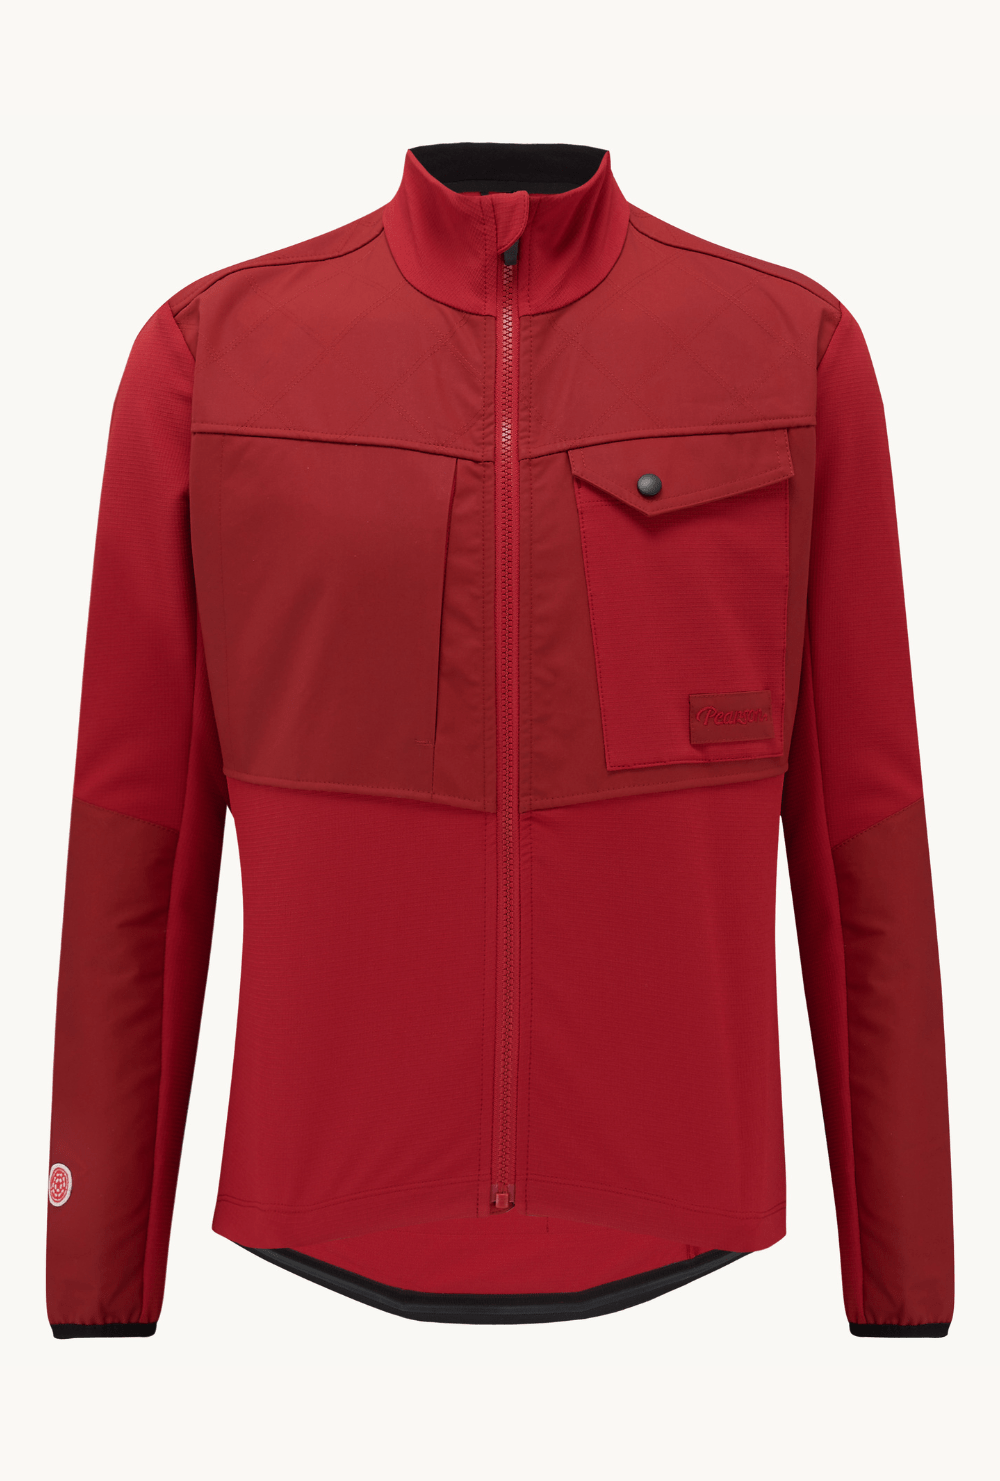 Pearson Cycles Pearson 1860, Because It's There - Red Adventure Long Sleeve Cycling Jacket, Cherry Red / Small